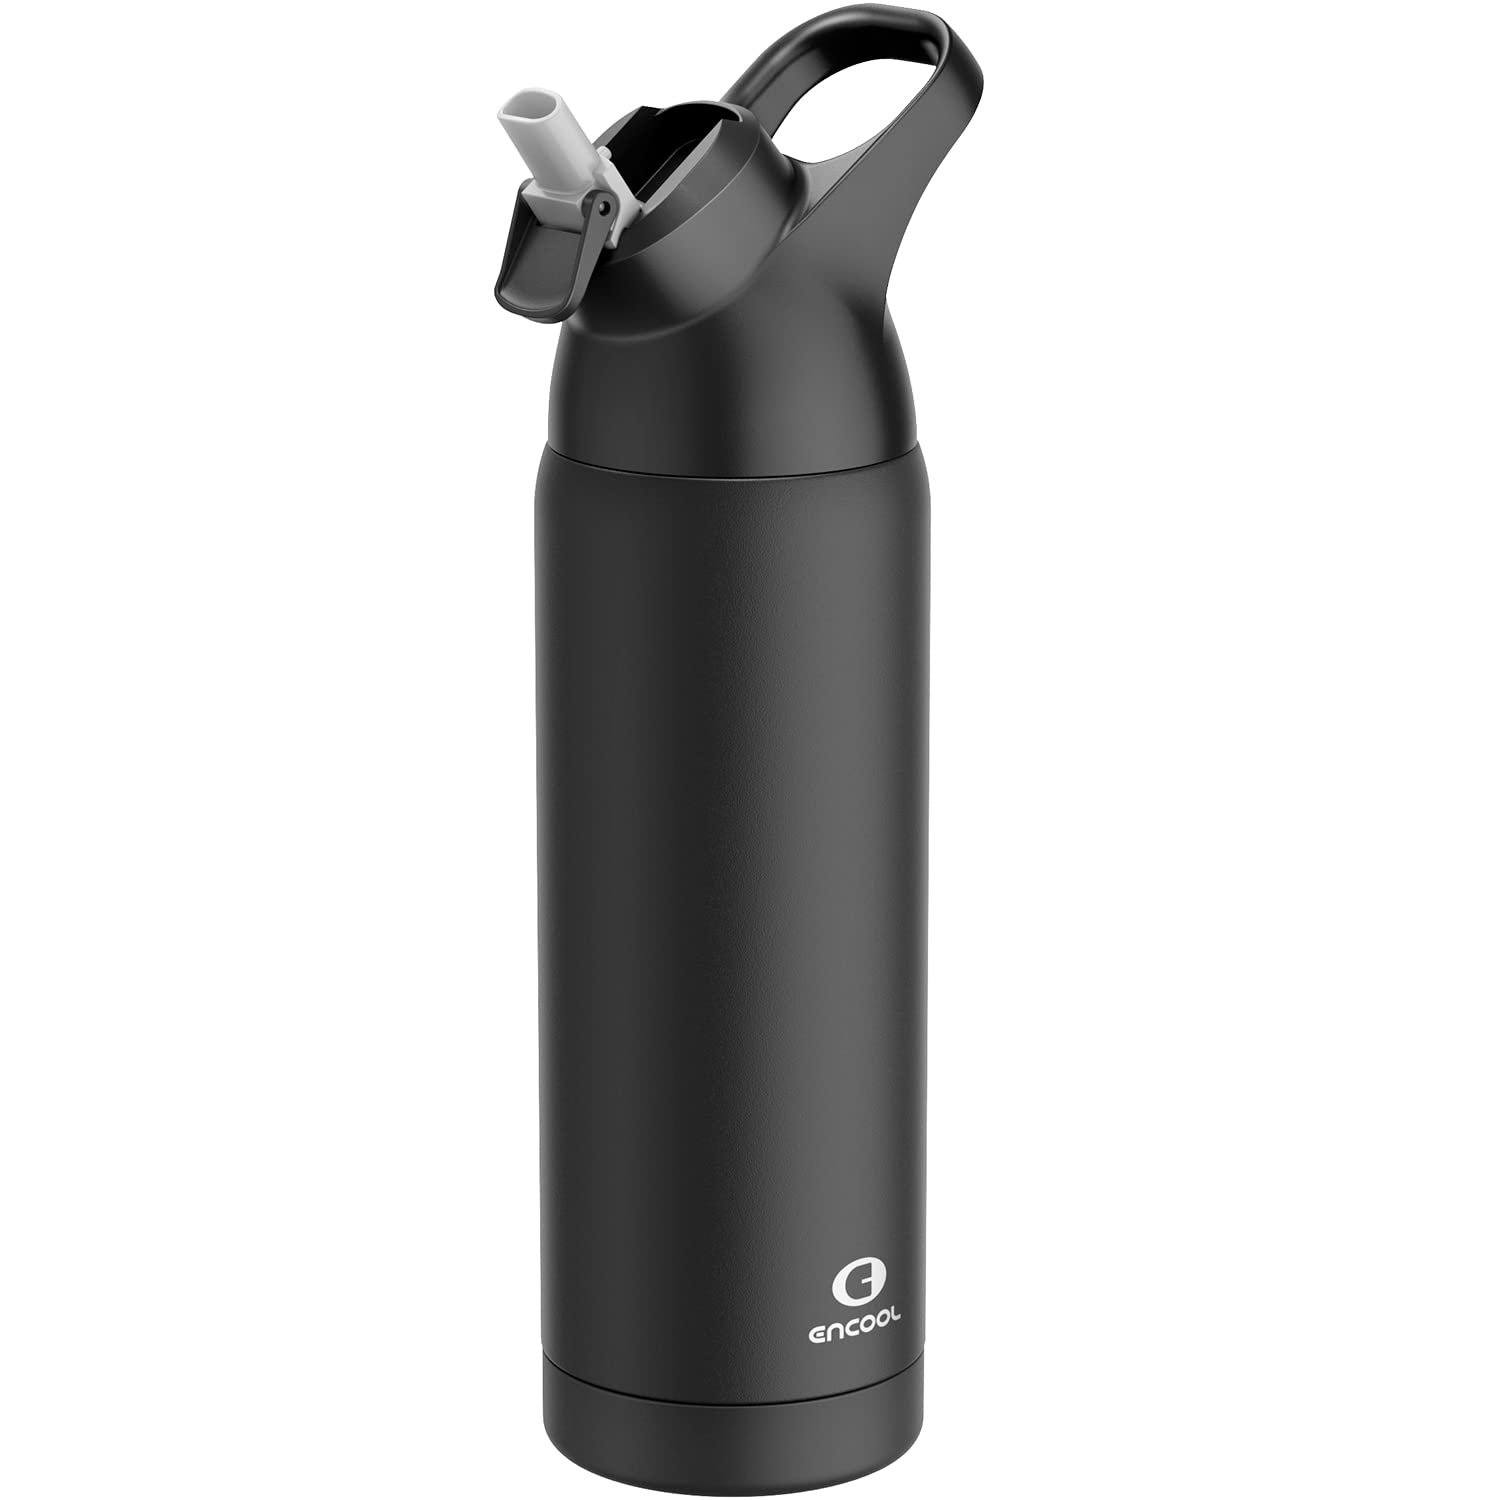 ENCOOL Insulated Stainless Steel Water Bottle with Straw and Carry Loop